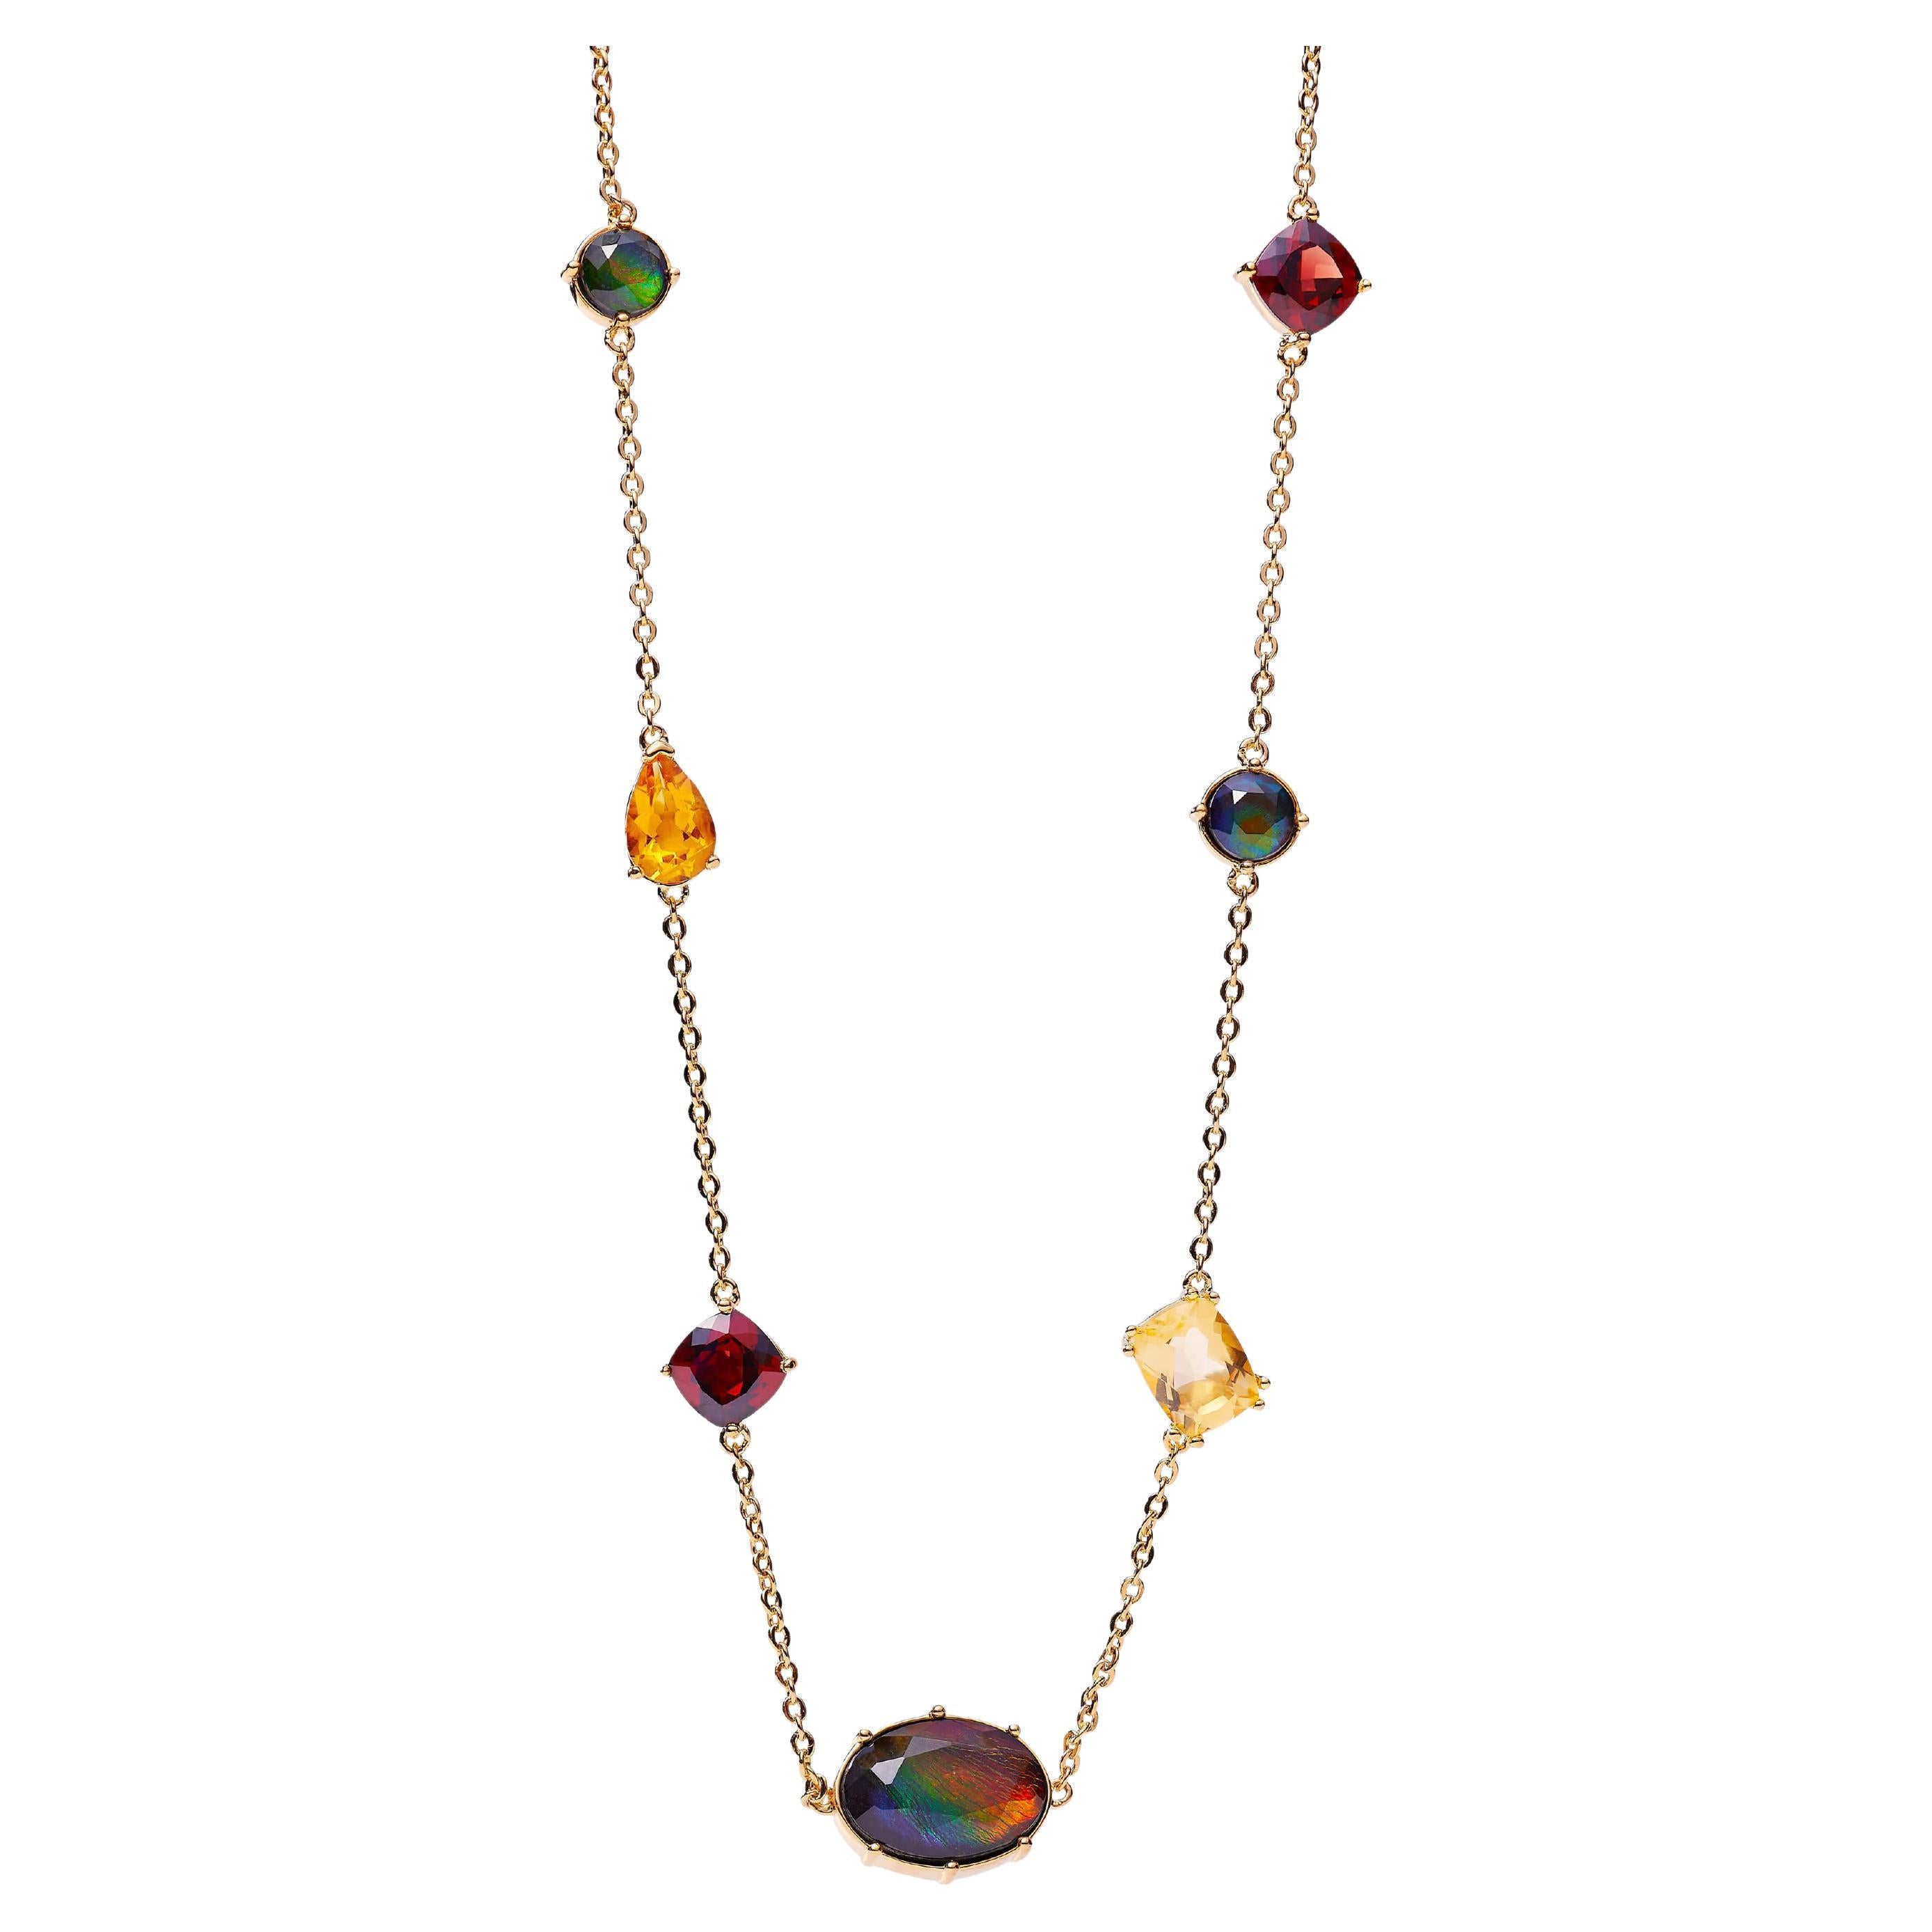 Radiant Ammolite Station Necklace with Garnet and Citrine, 18k Gold Vermeil, AA For Sale